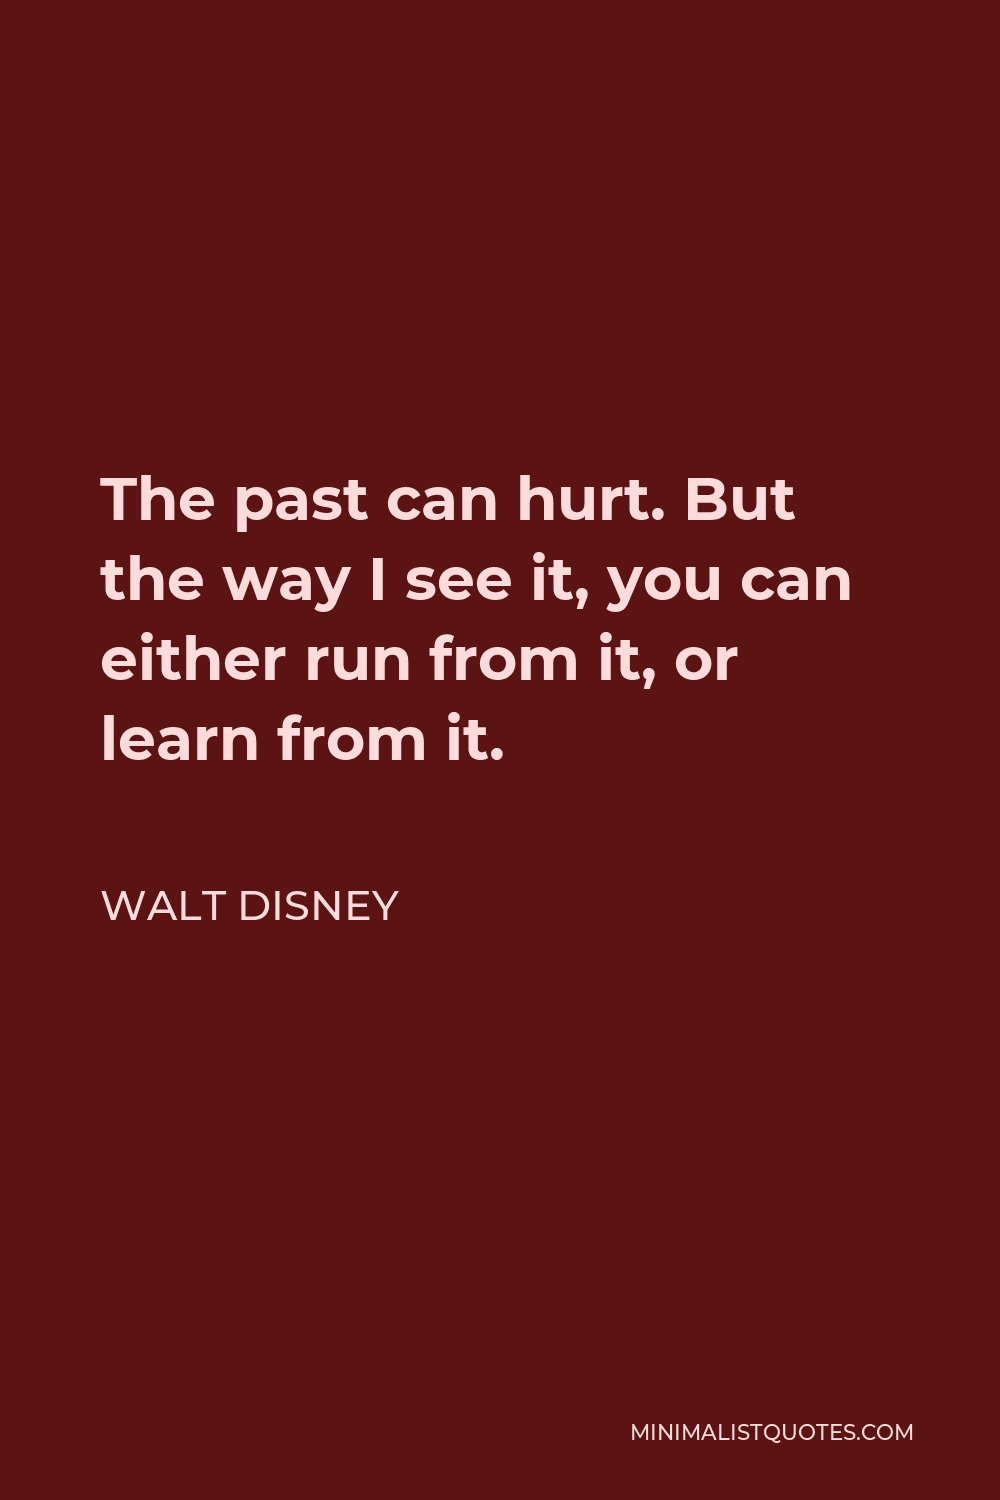 Walt Disney Quote: The past can hurt. But the way I see it, you can ...